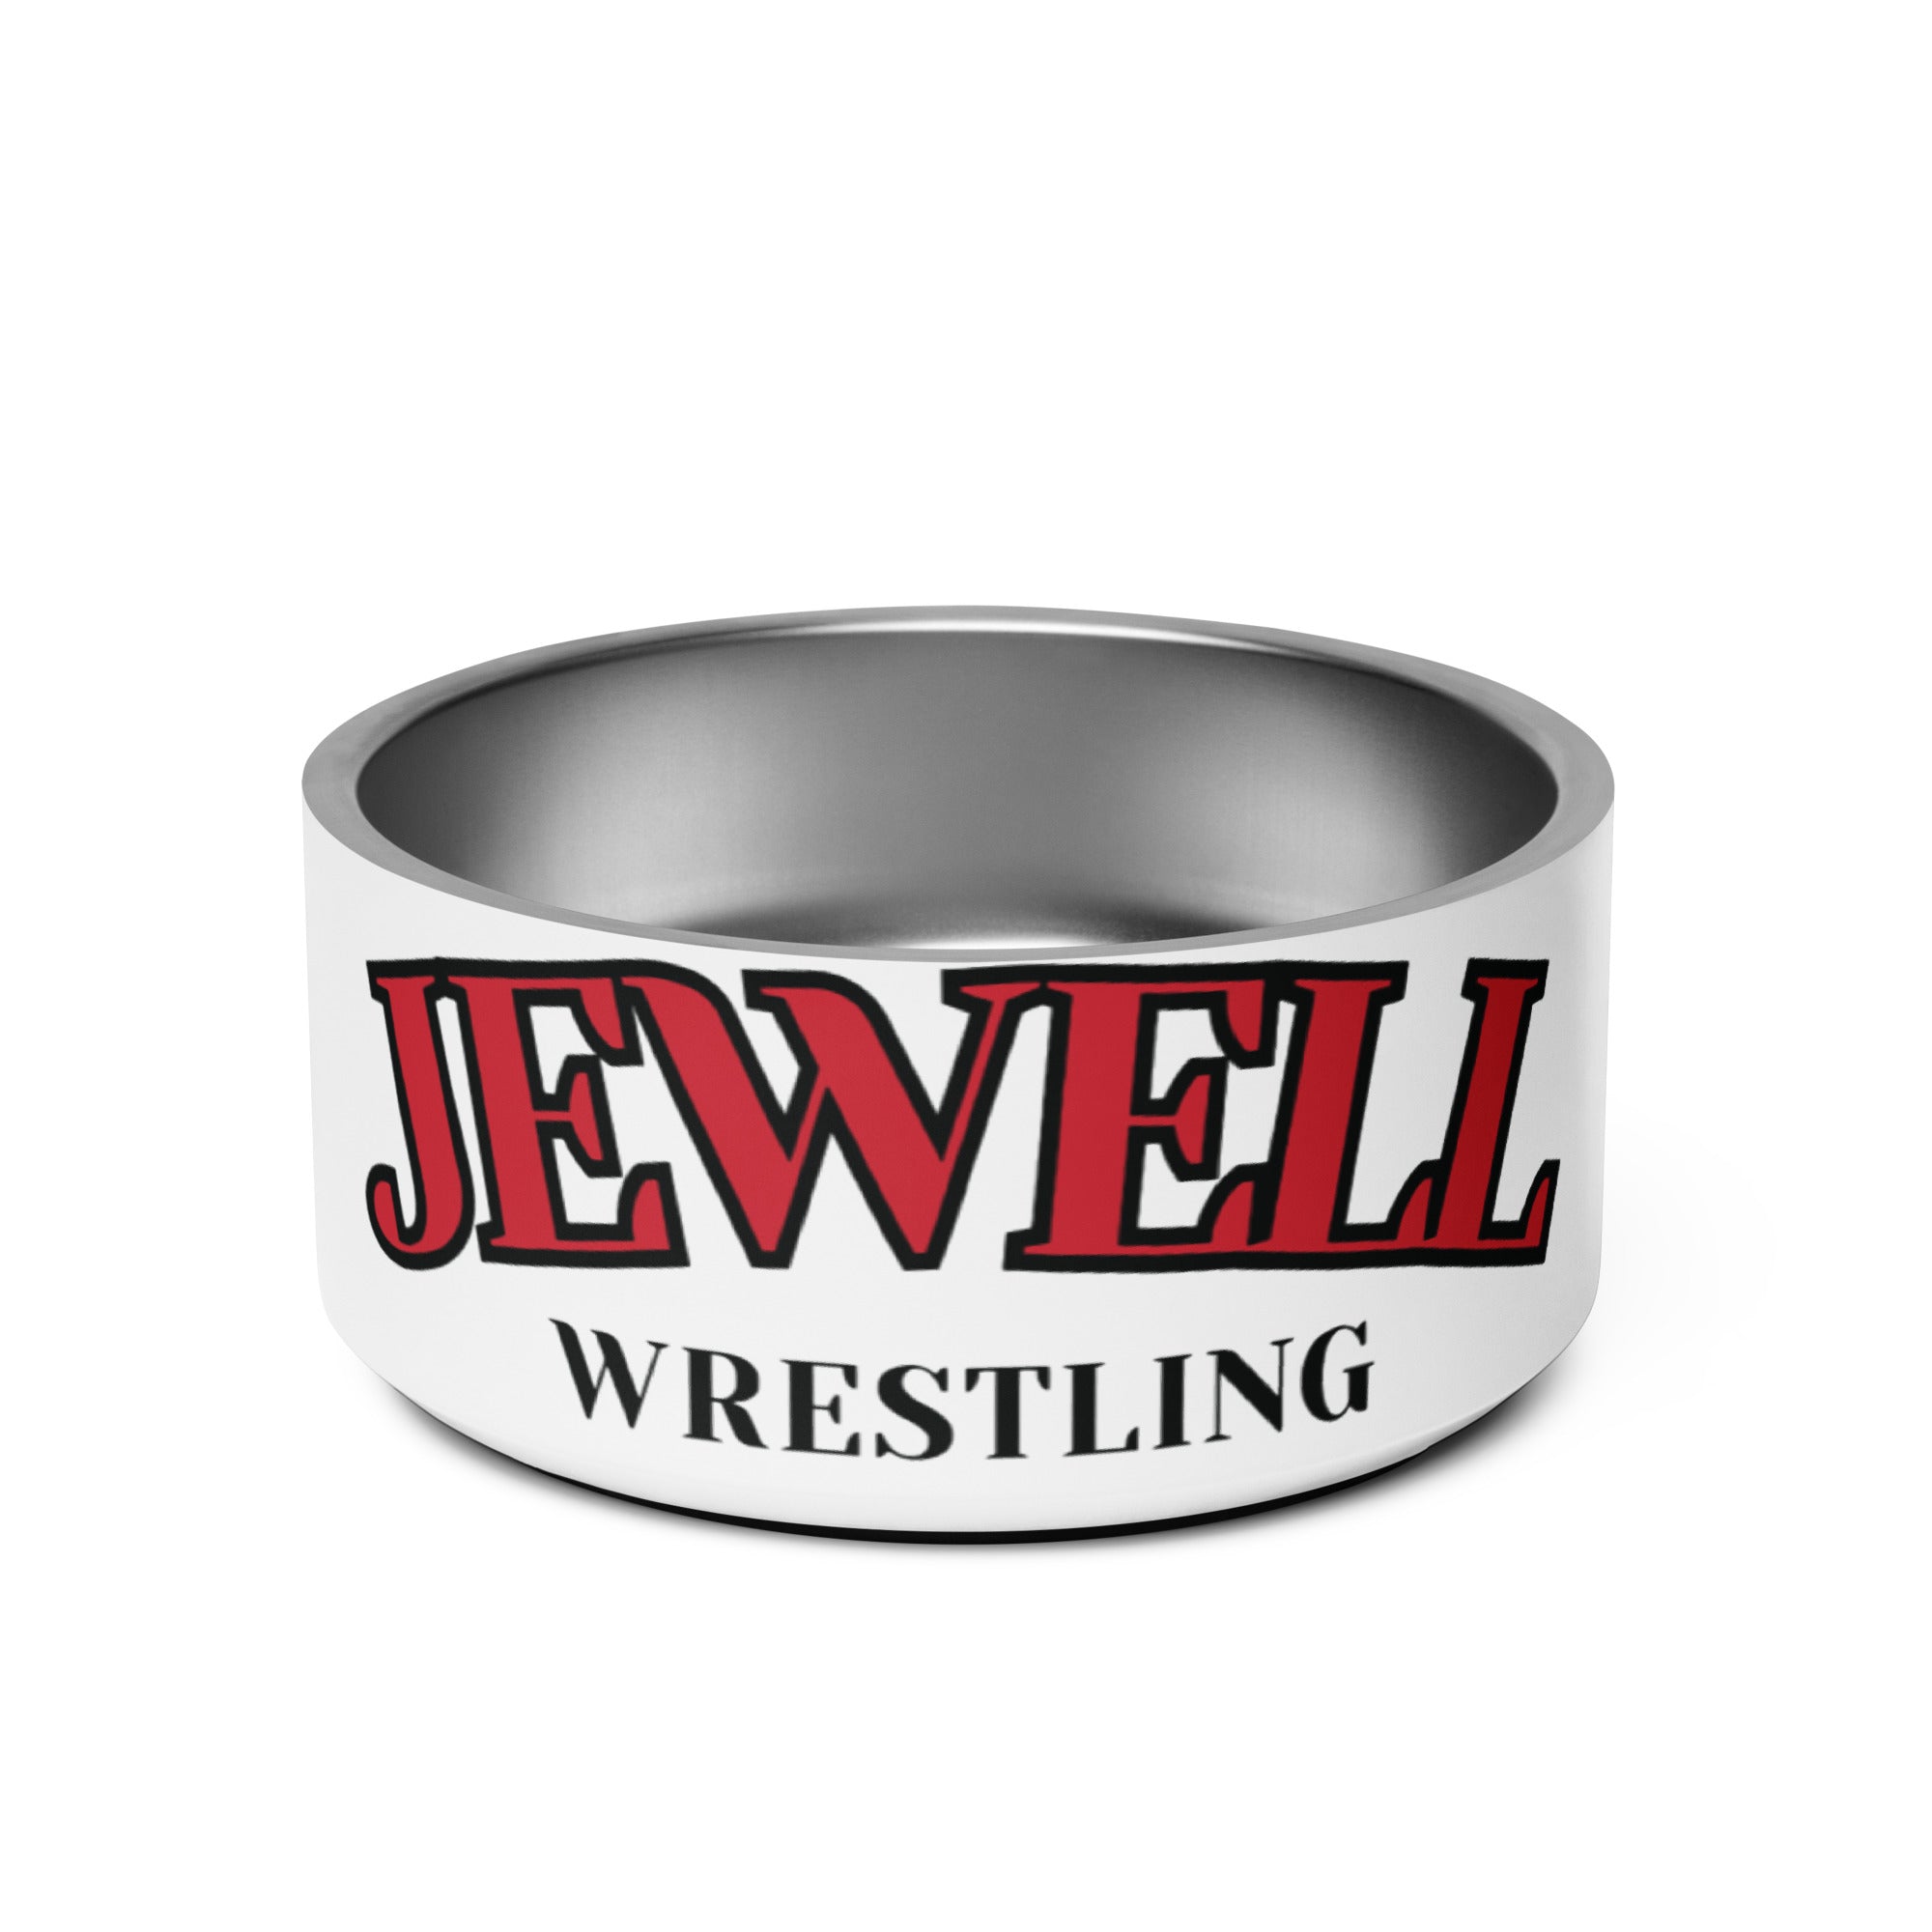 William Jewell Wrestling All Over Print Pet bowl